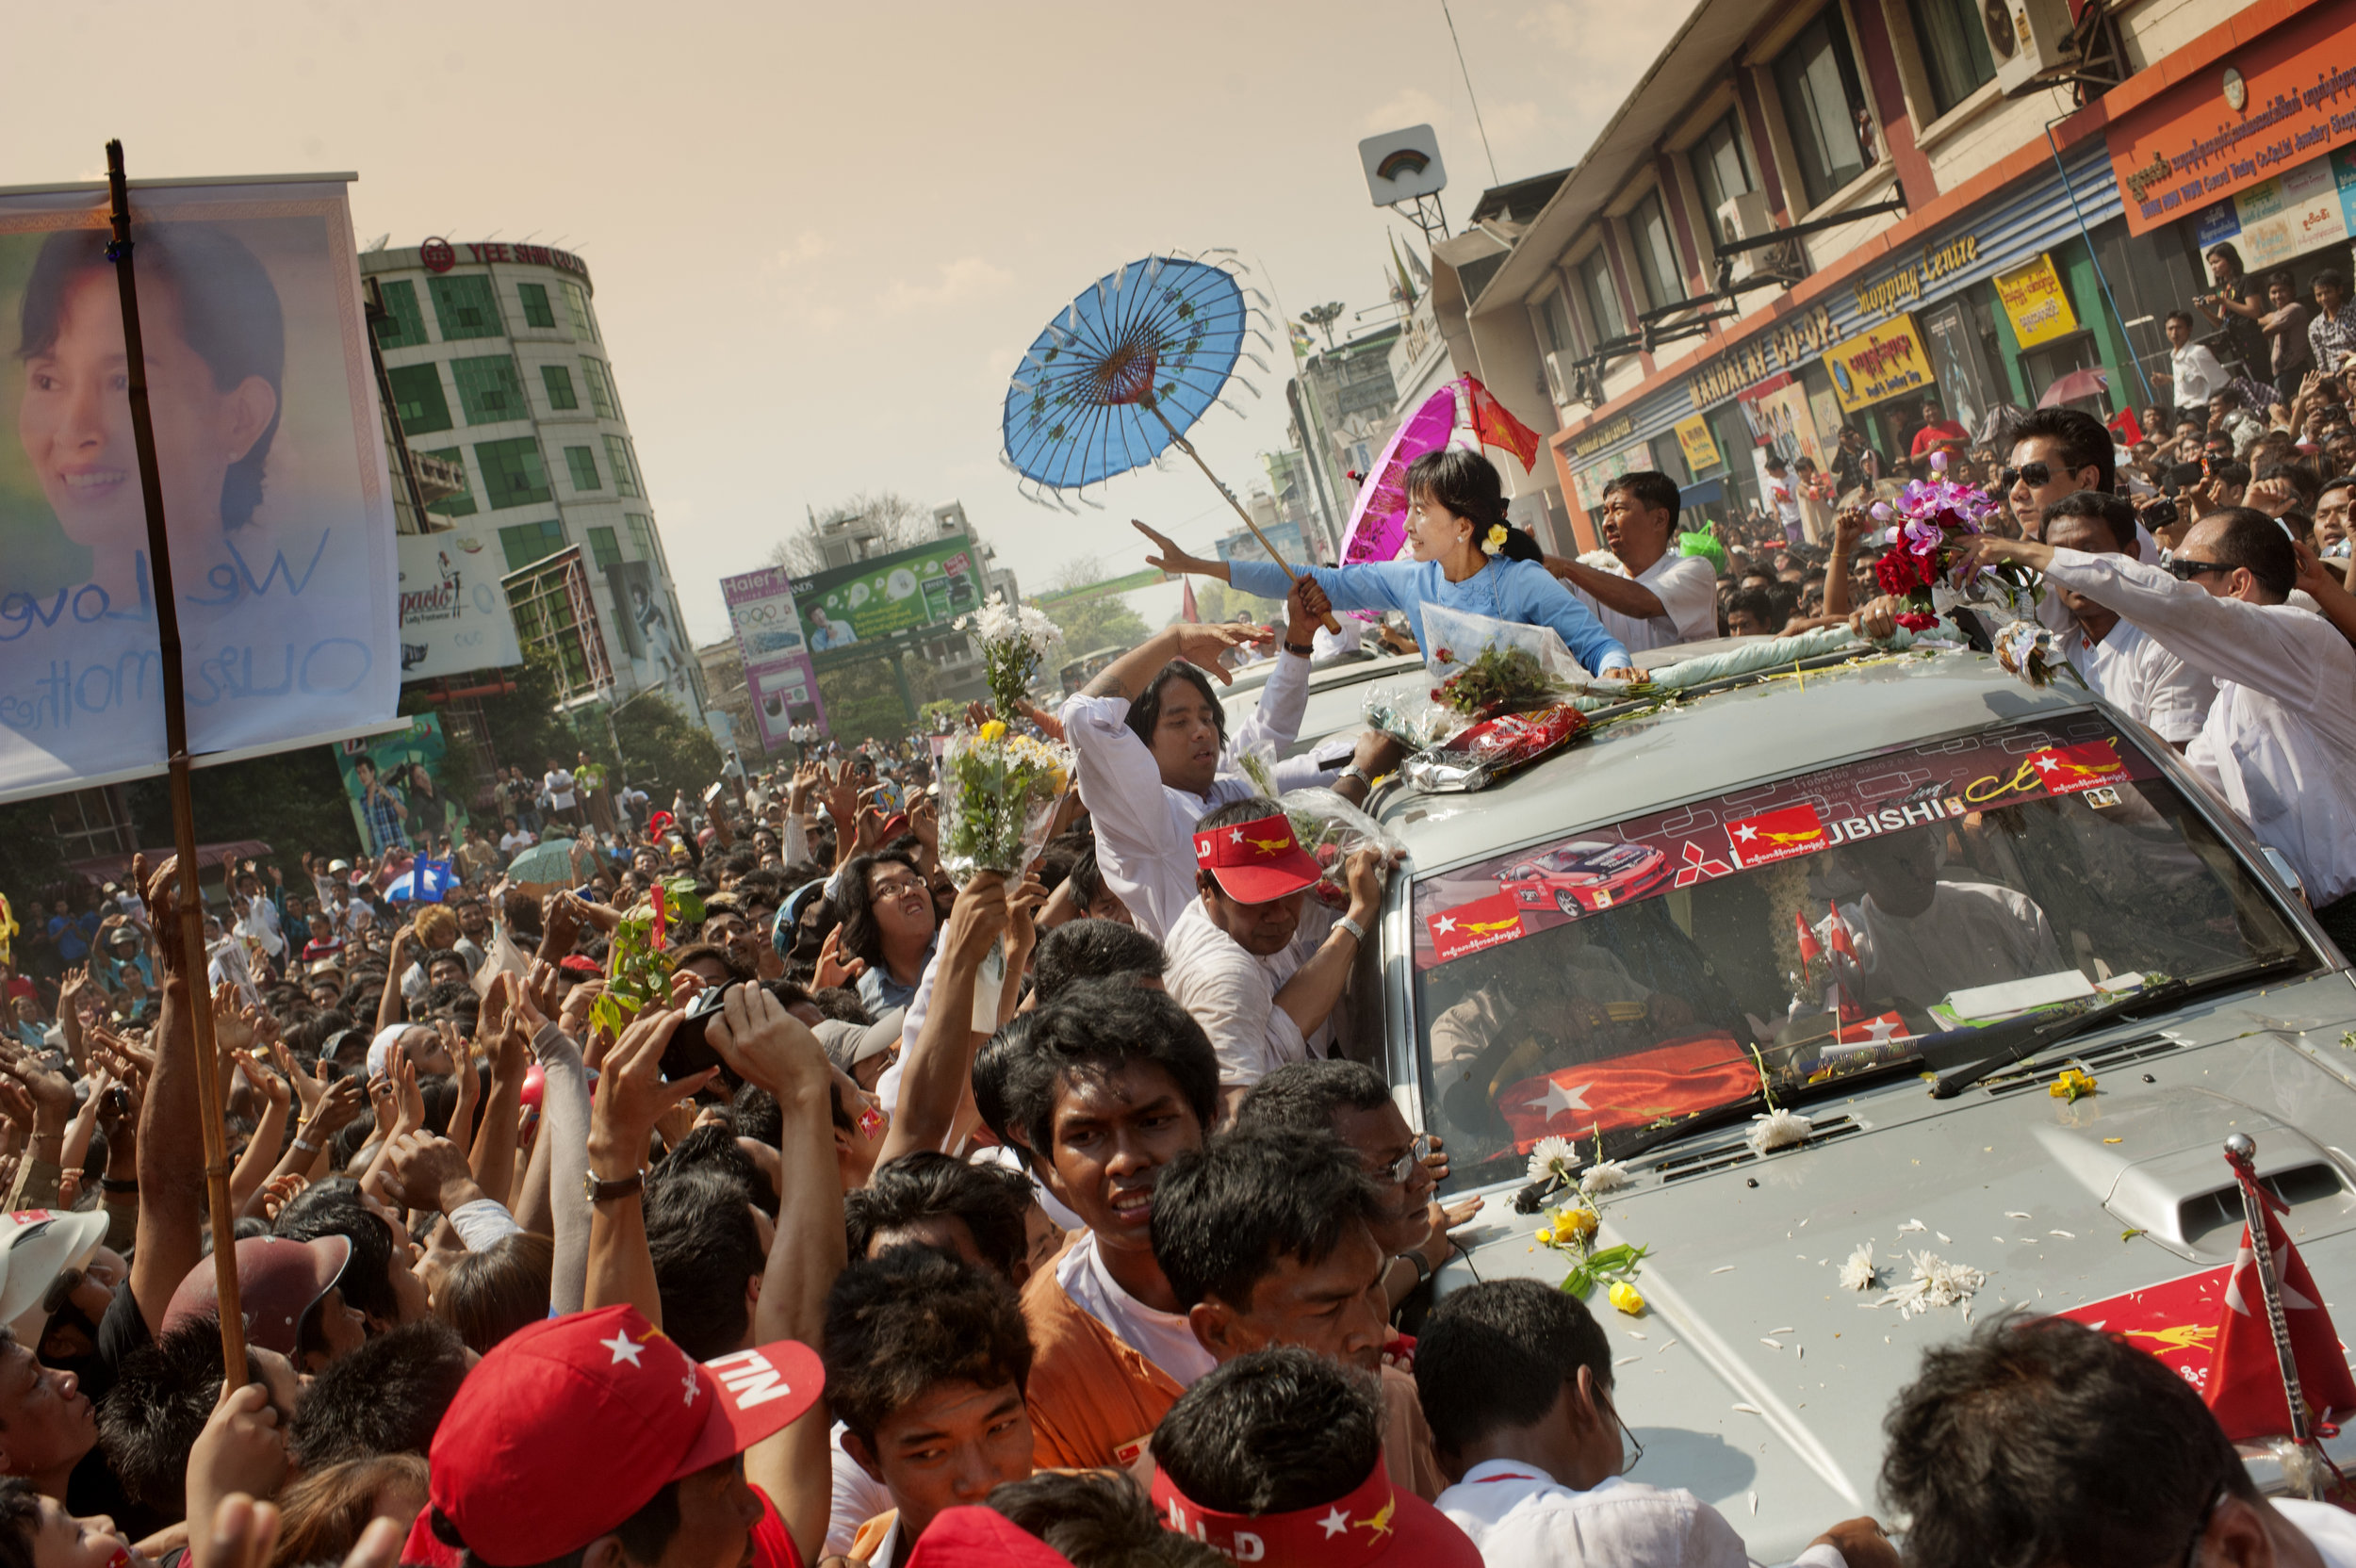  Aung San Suu Kyi, is greeted on the streets of Mandalay for the upcoming parliamentary seats election / Burma - 2012 